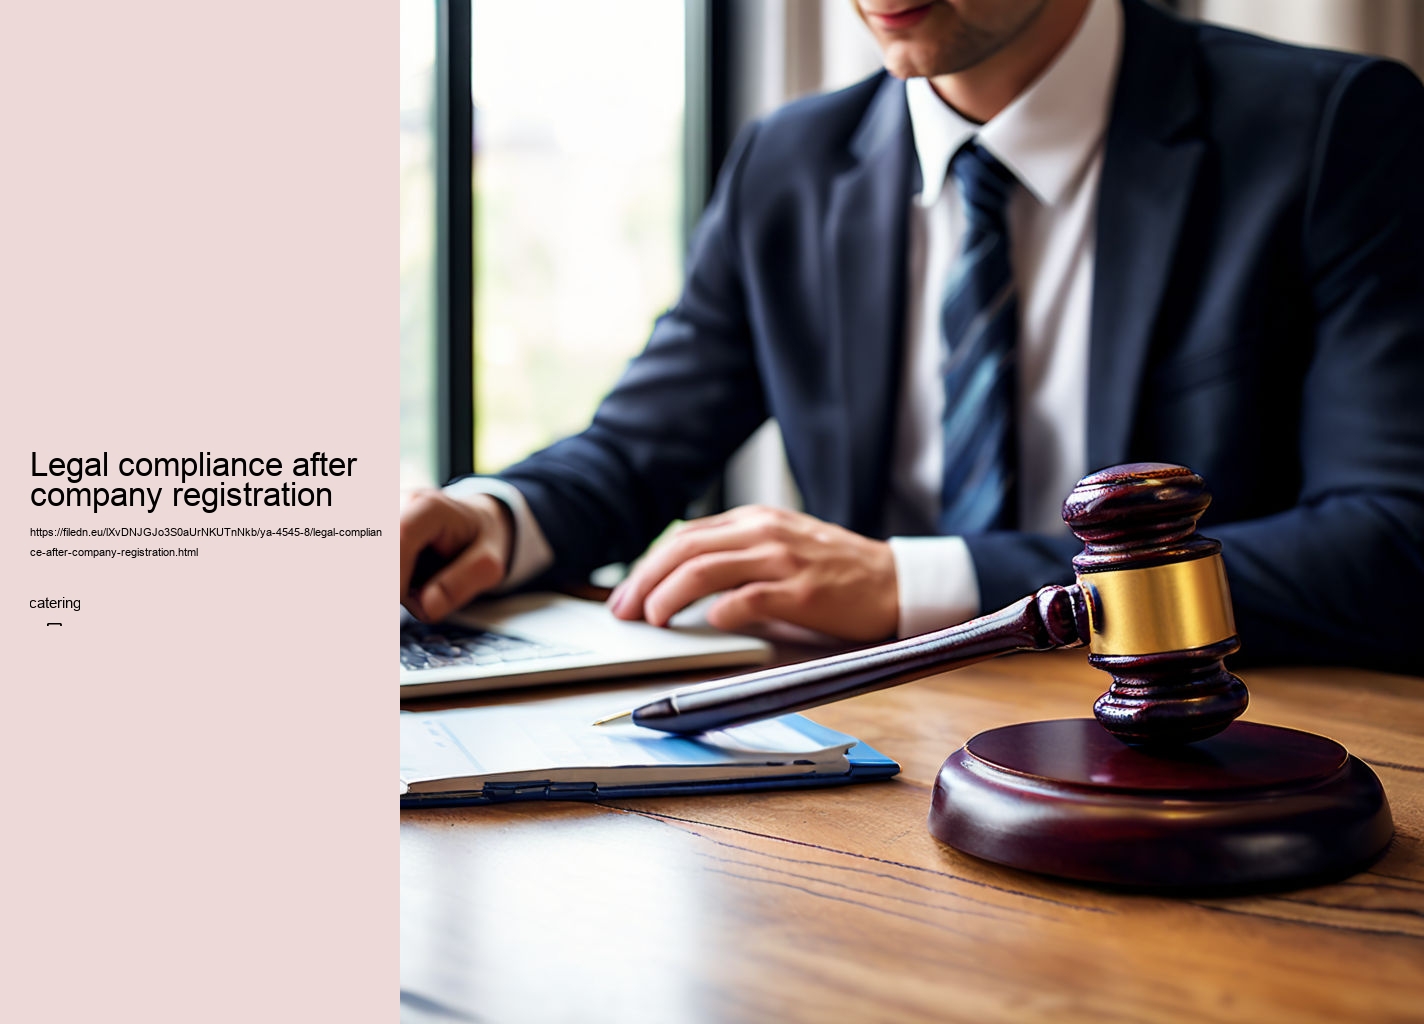 Legal compliance after company registration